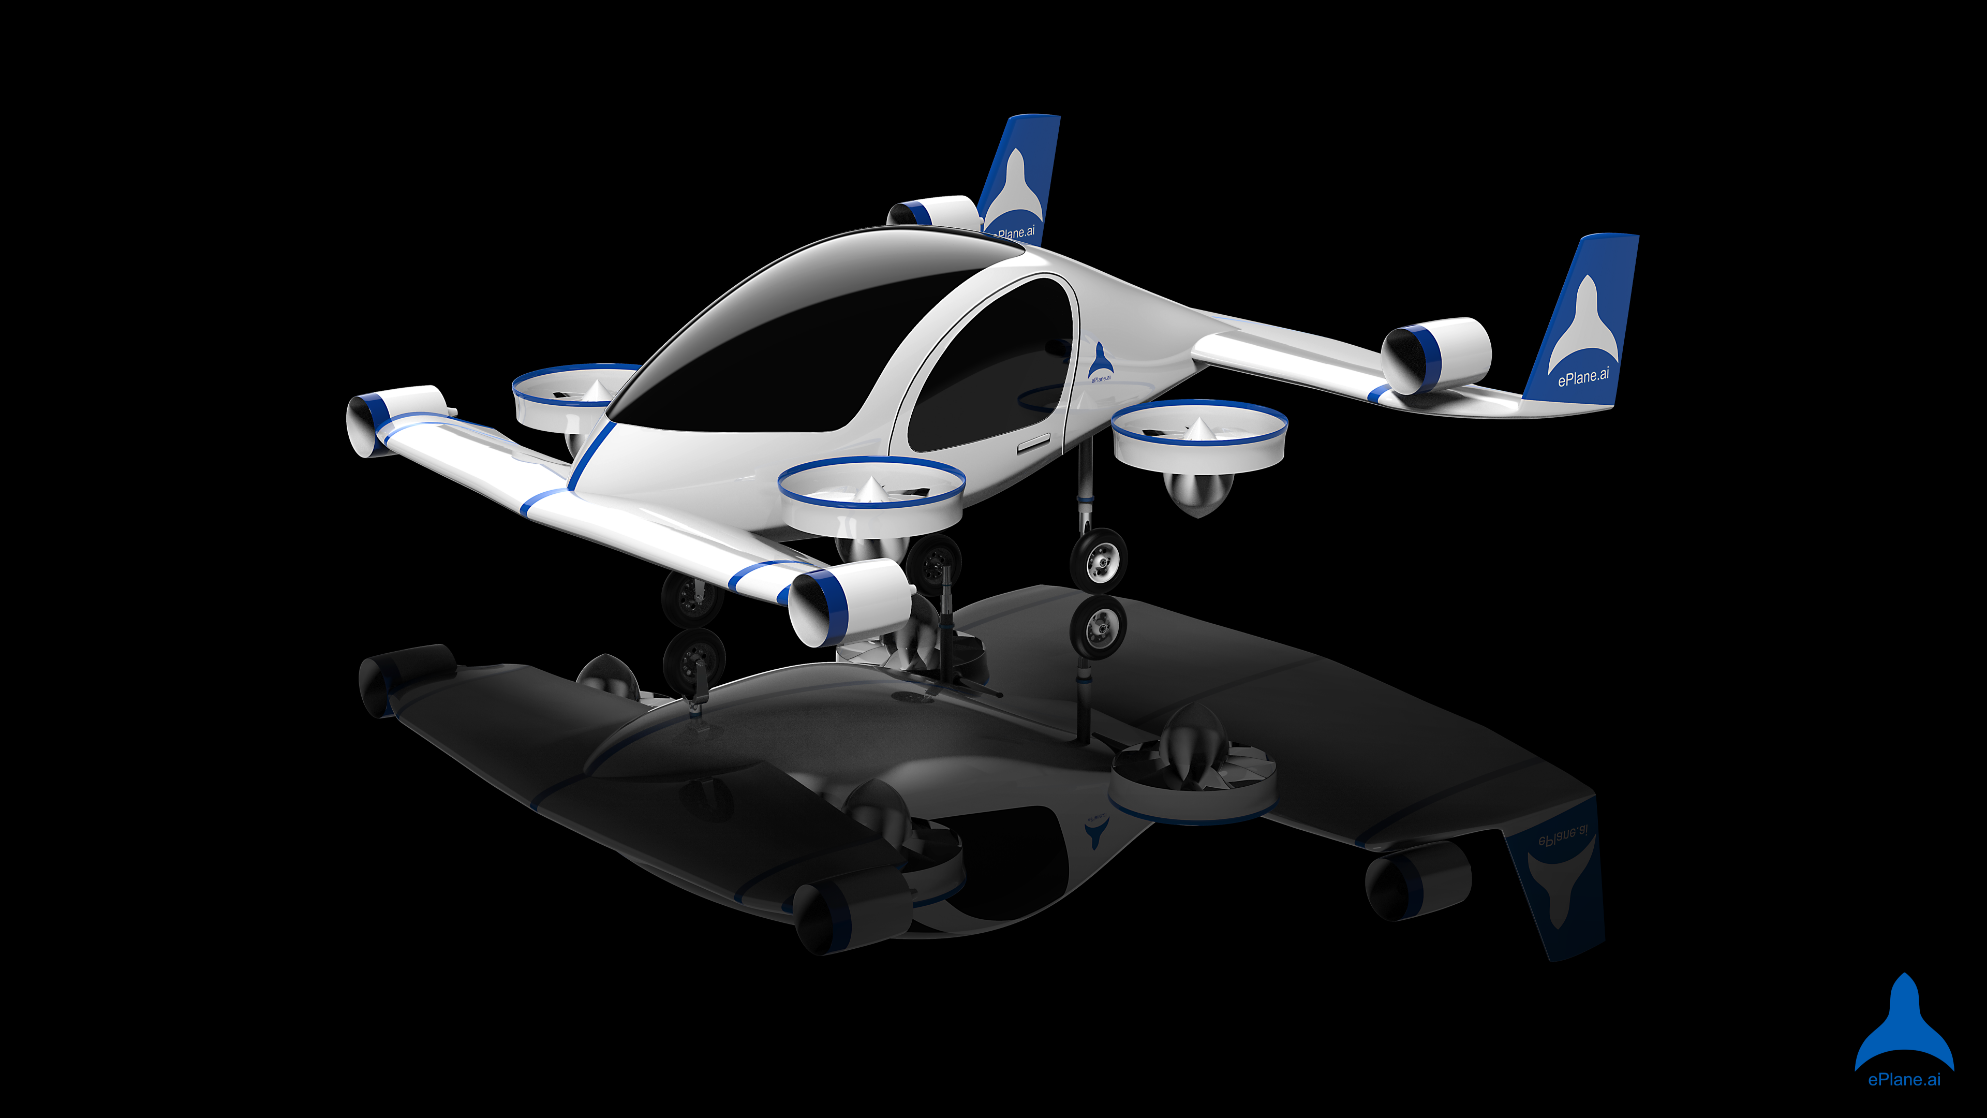 <p>As per the startup's website, an ePlane will take only 14 minutes to reach a place that will take 60 minutes by a personal vehicle. The company's vision is to alleviate congestion in urban spaces with eVTOLs.</p>